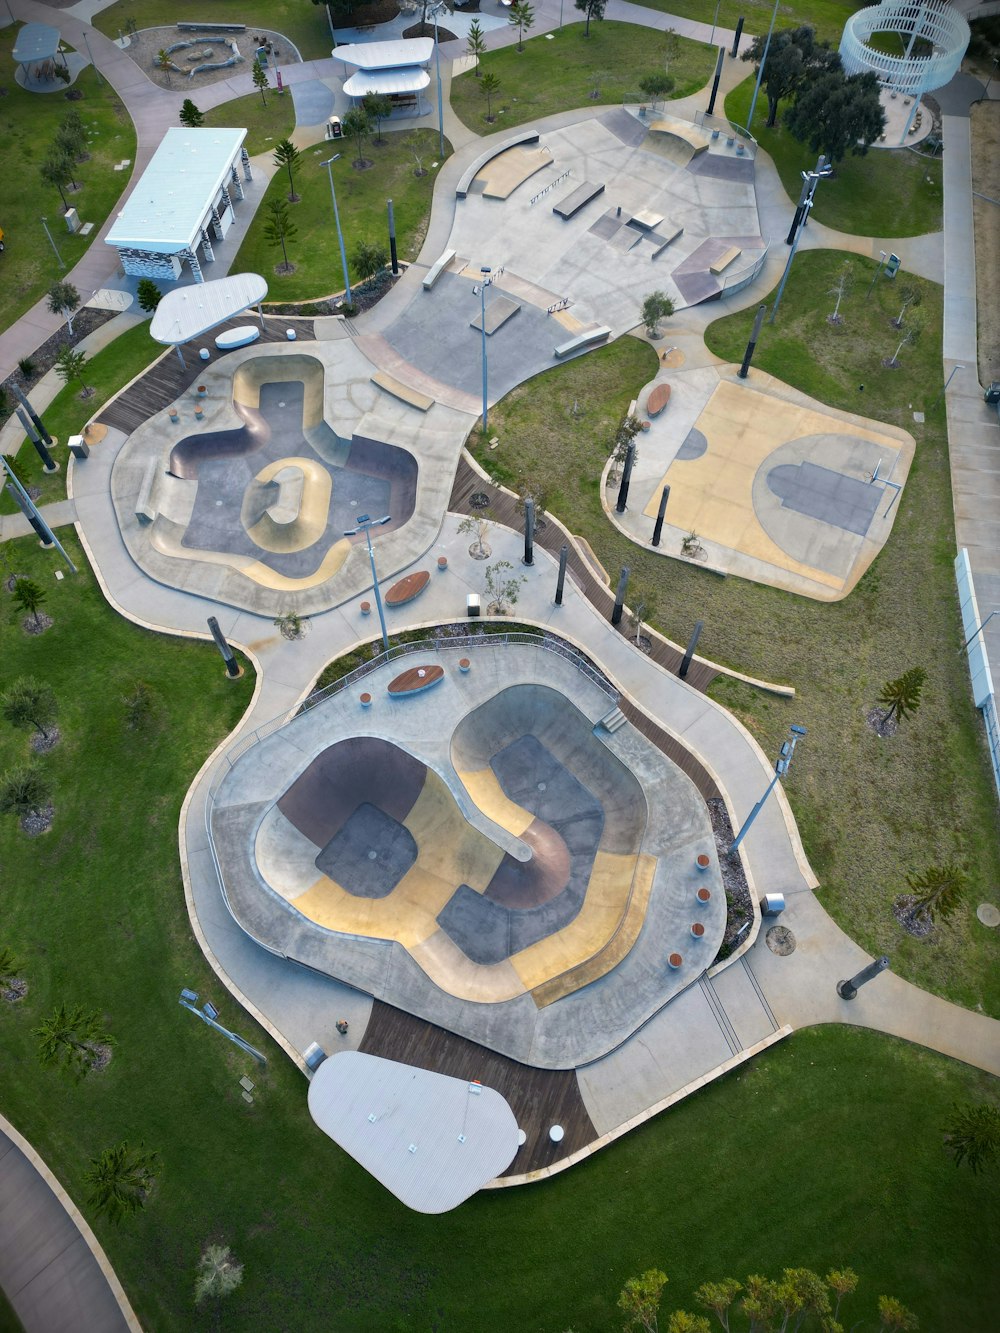 an aerial view of a skate park with ramps and ramps